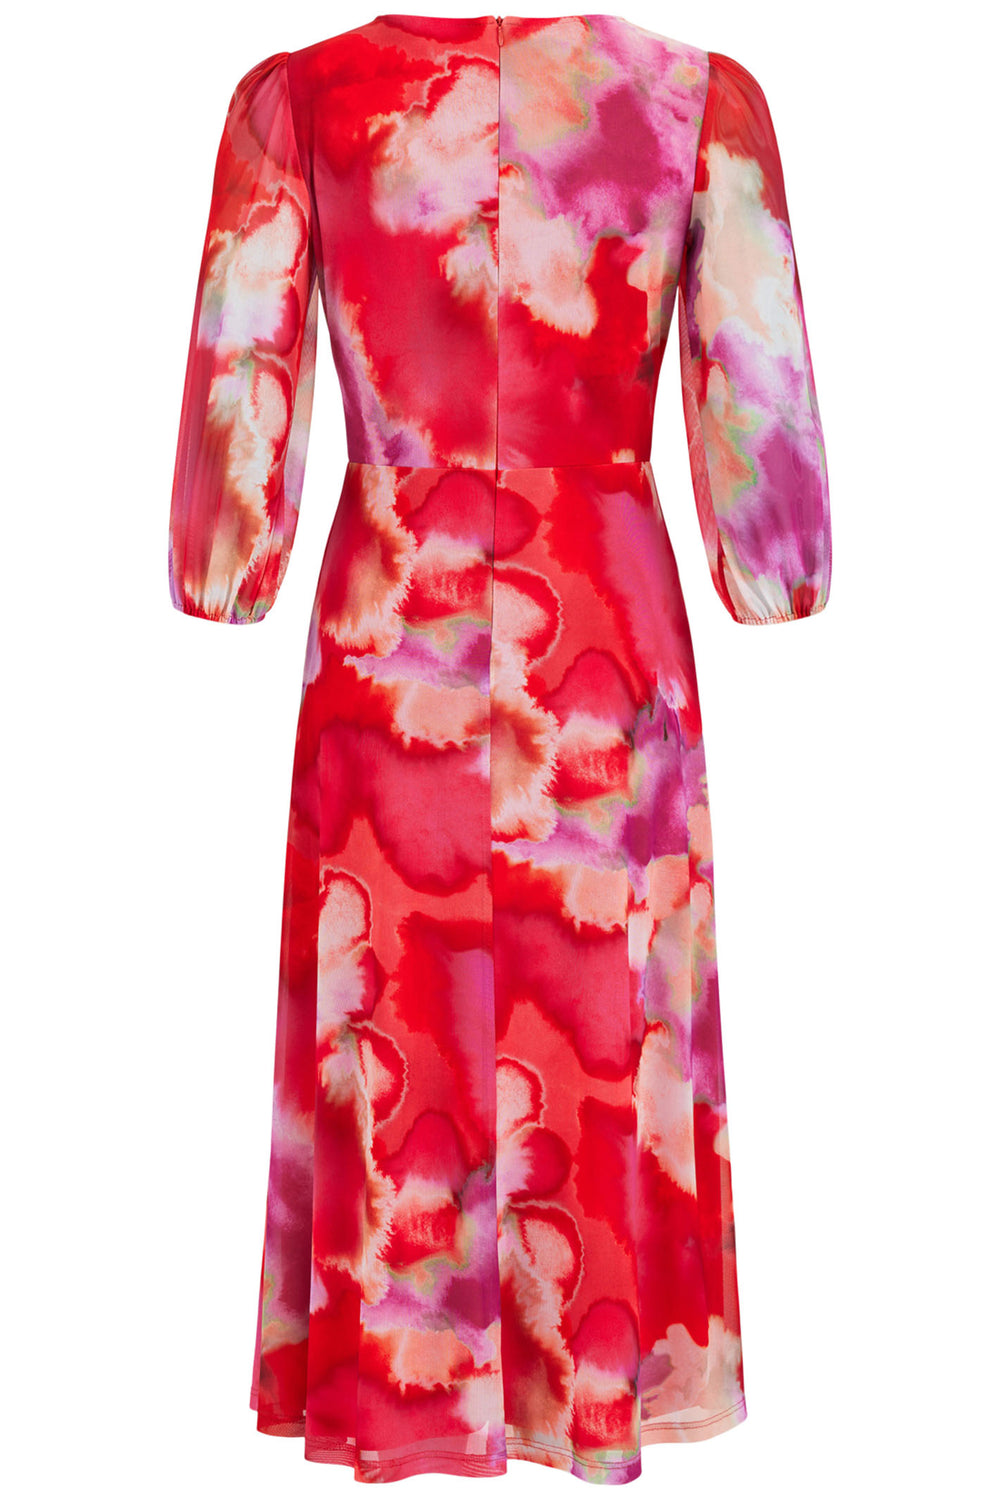 Tia London 78809 46 Red Abstract Print Crossover Dress - Experience Boutique